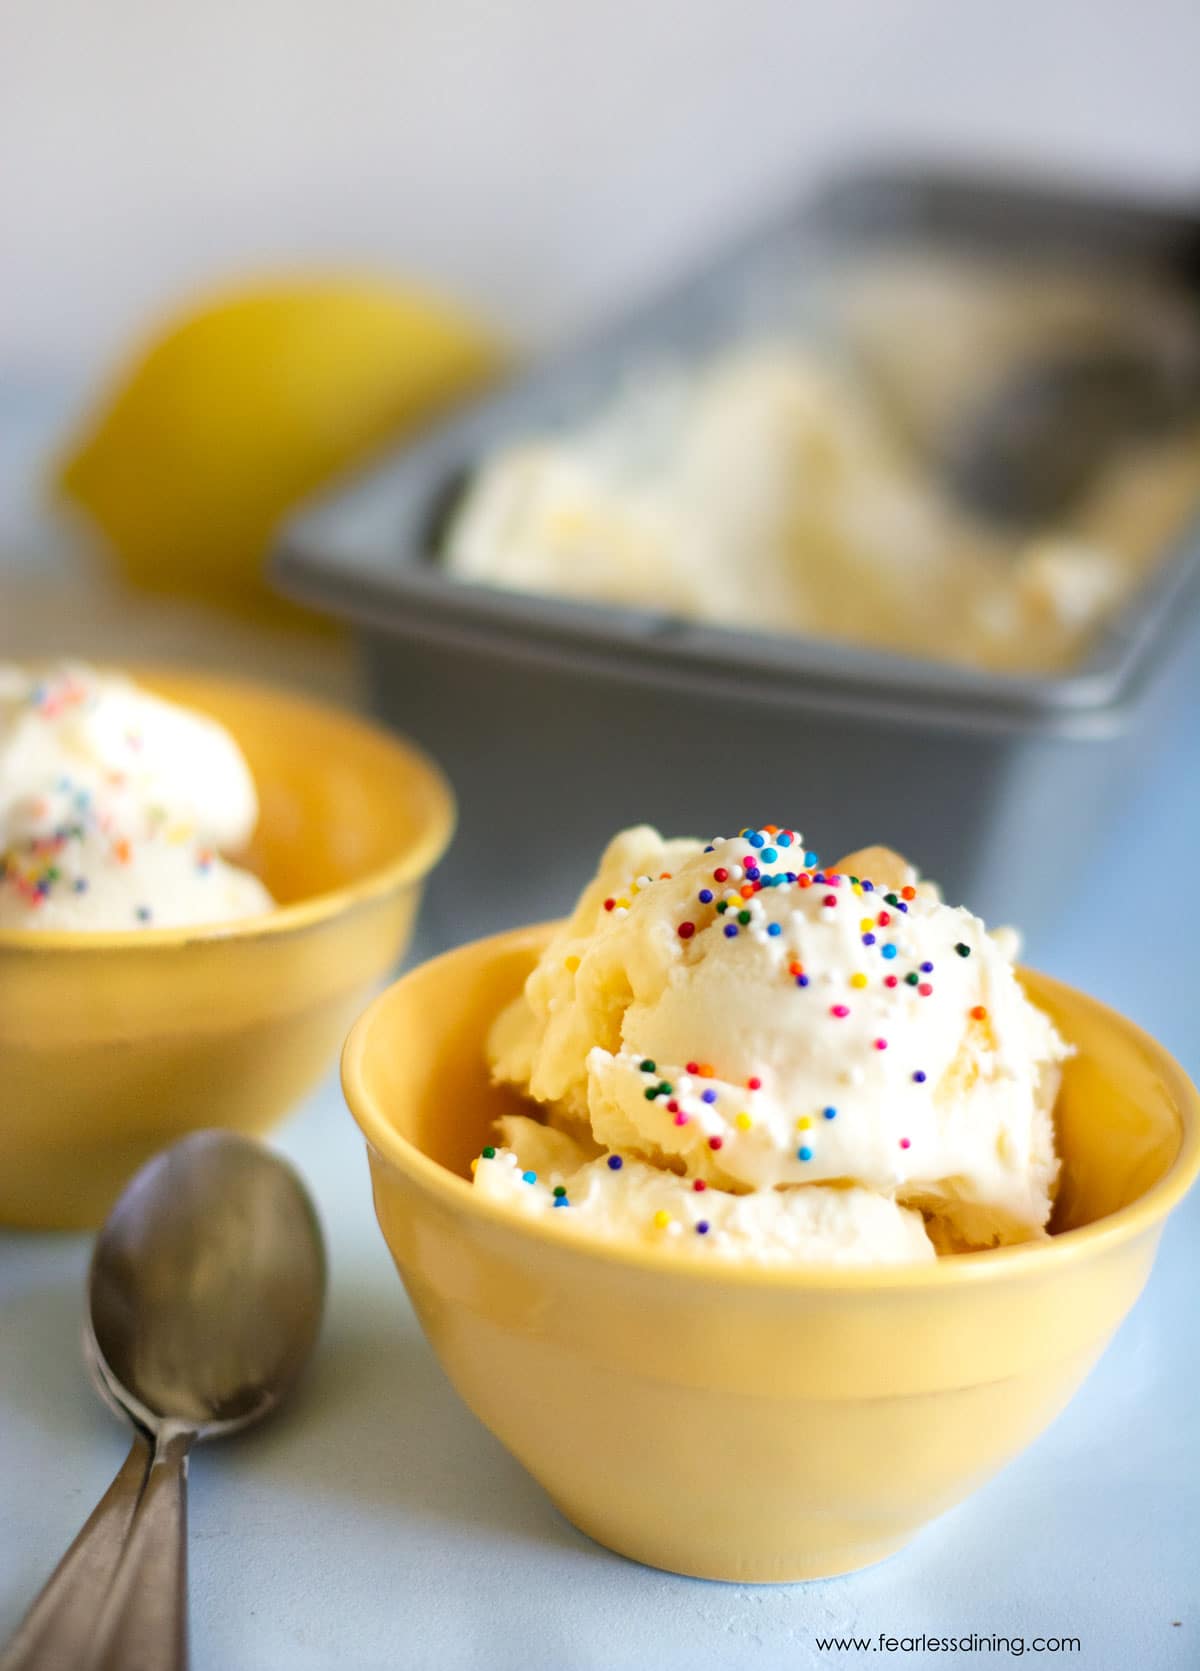 A yellow bowl filled with lemon ice cream. It is topped with rainbow sprinkles.